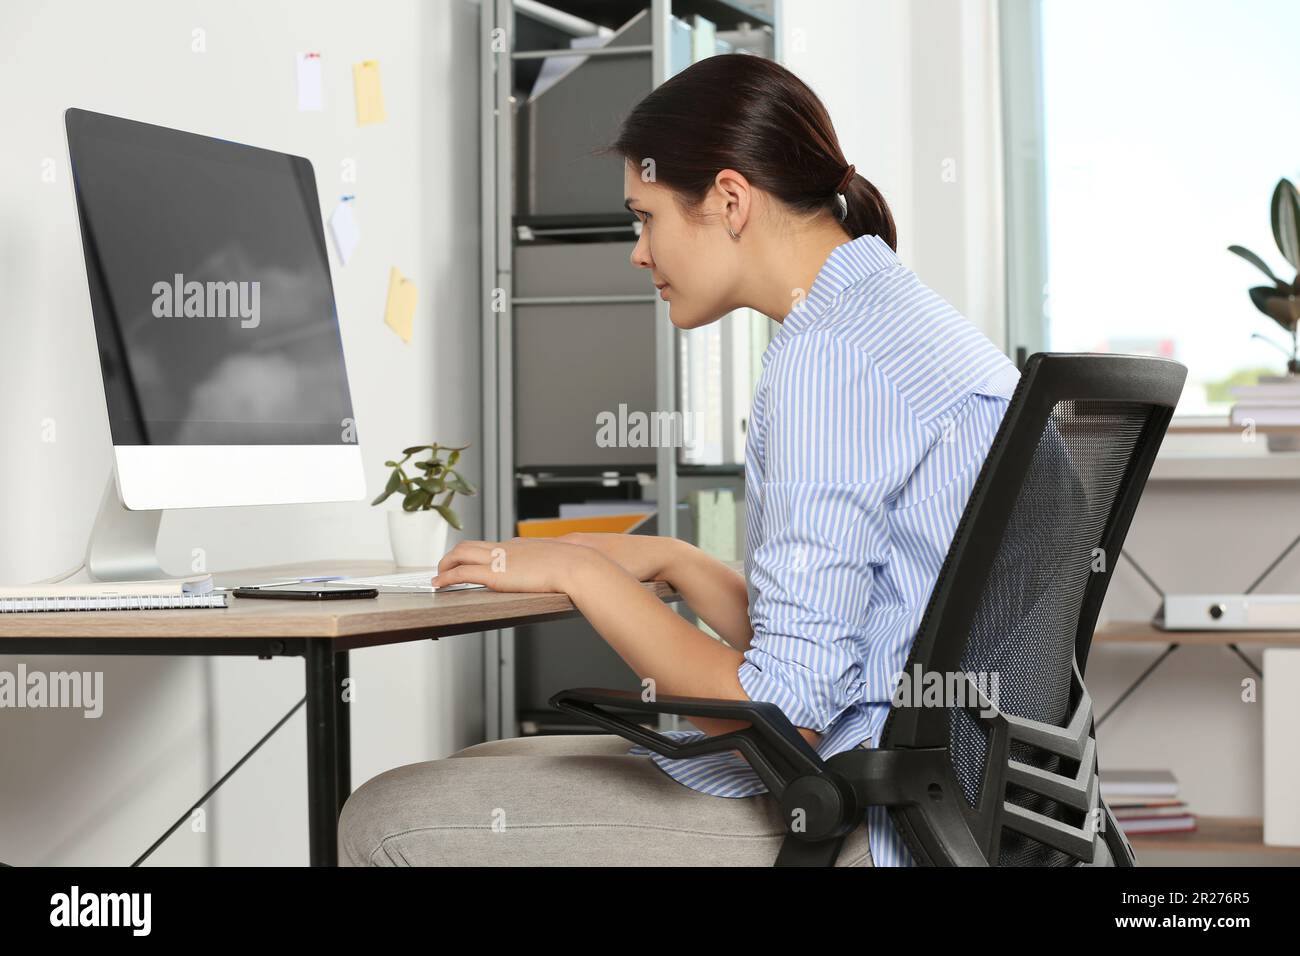 https://c8.alamy.com/comp/2R276R5/young-woman-with-bad-posture-sitting-at-workplace-in-office-symptom-of-scoliosis-2R276R5.jpg